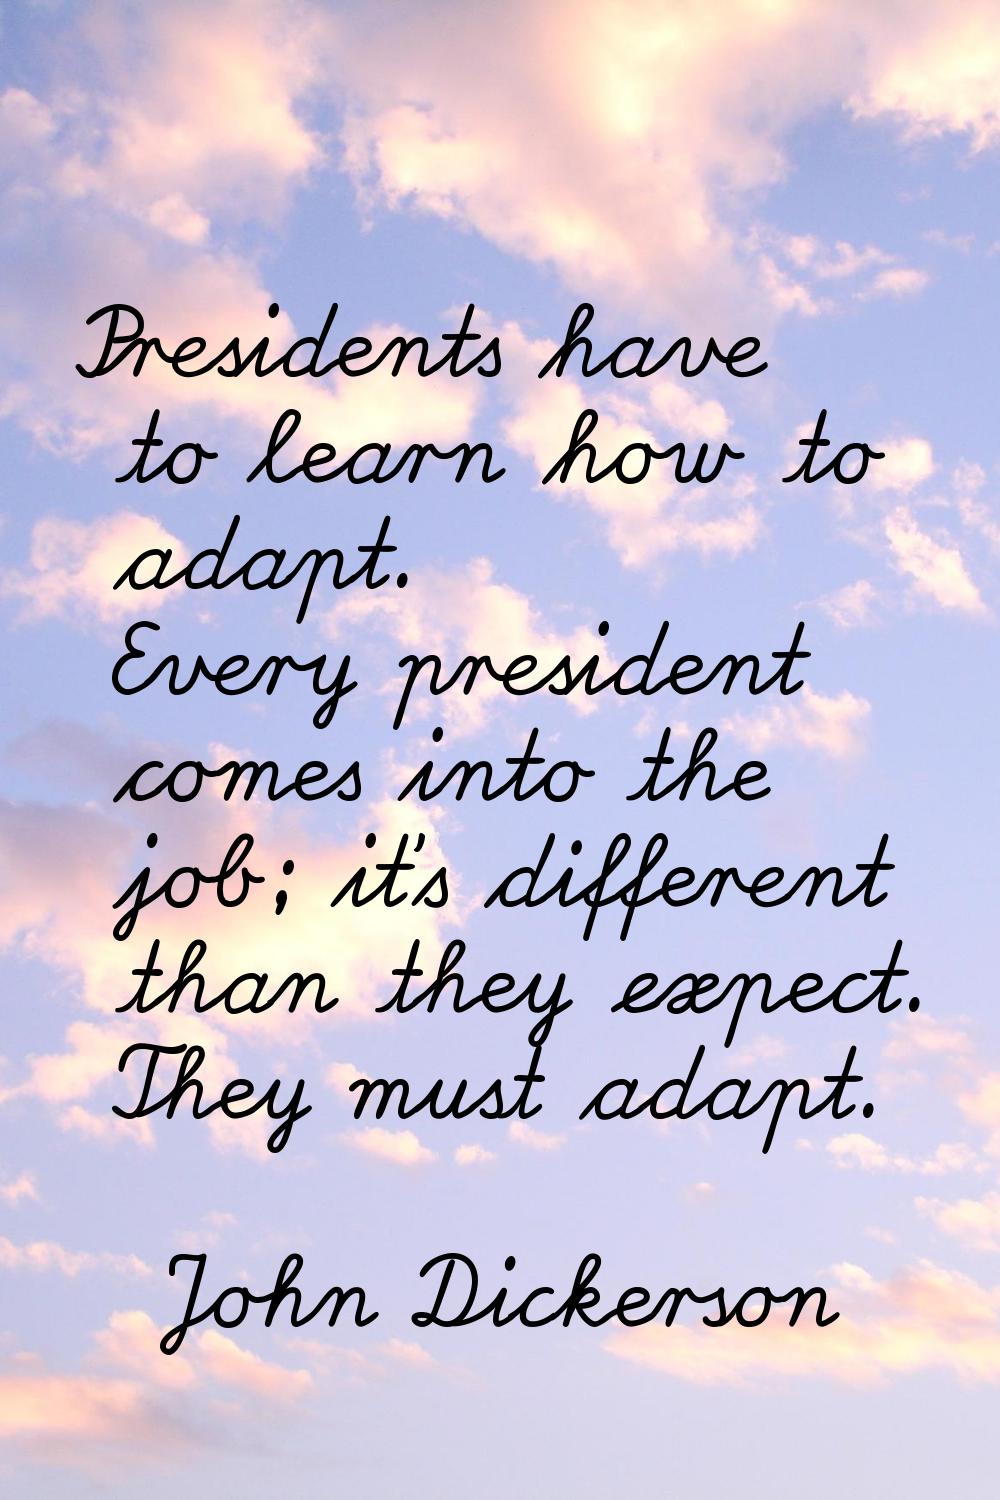 Presidents have to learn how to adapt. Every president comes into the job; it's different than they